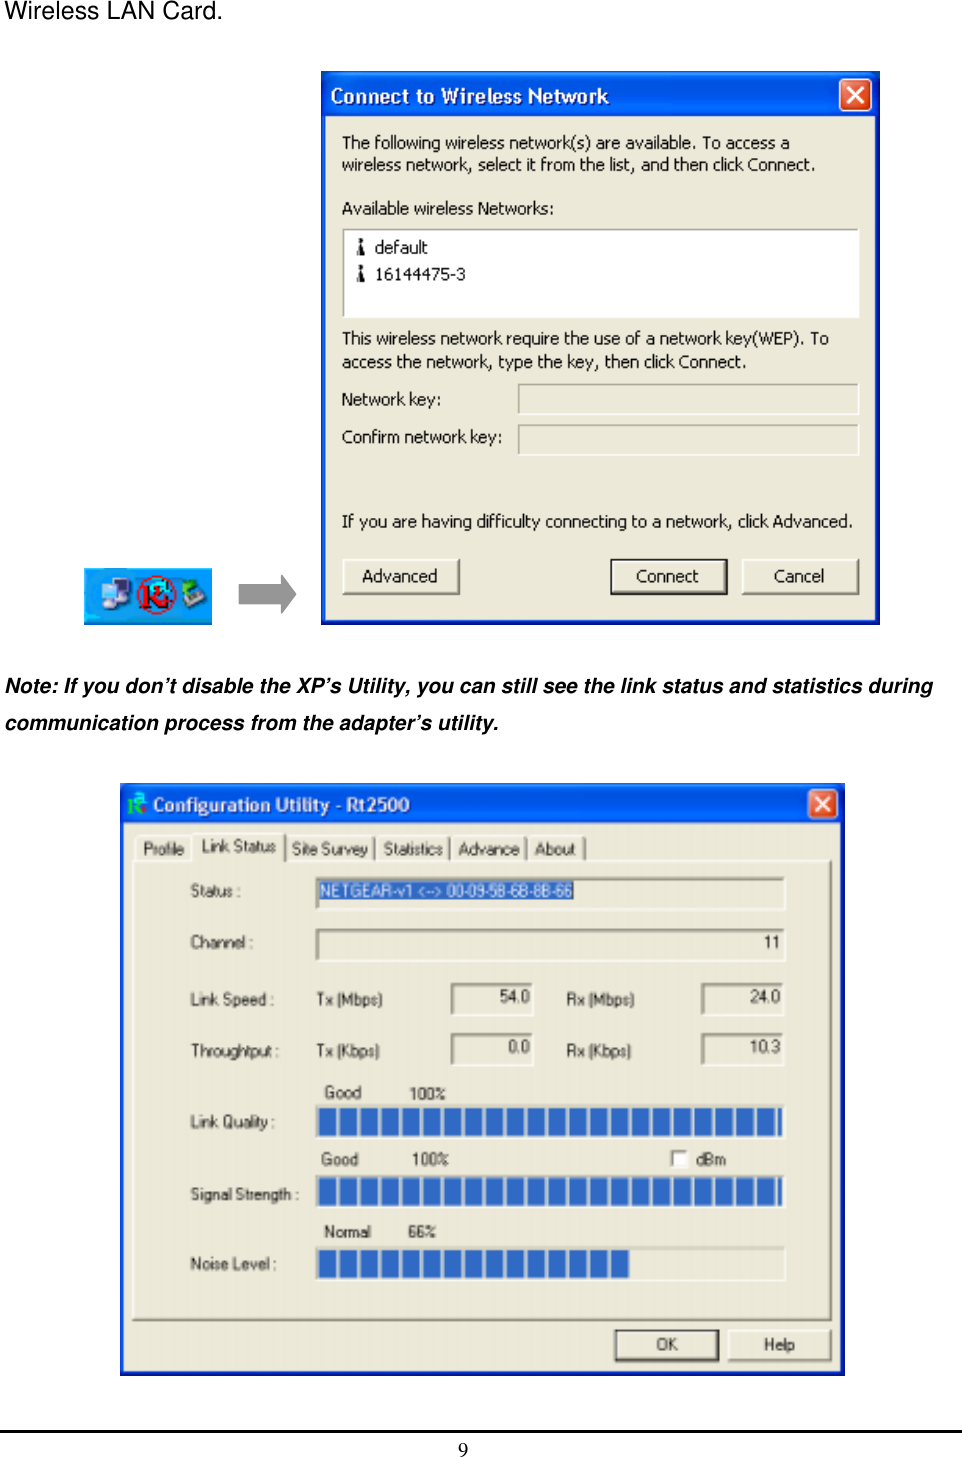  Wireless LAN Card.            Note: If you don’t disable the XP’s Utility, you can still see the link status and statistics during communication process from the adapter’s utility.  9  